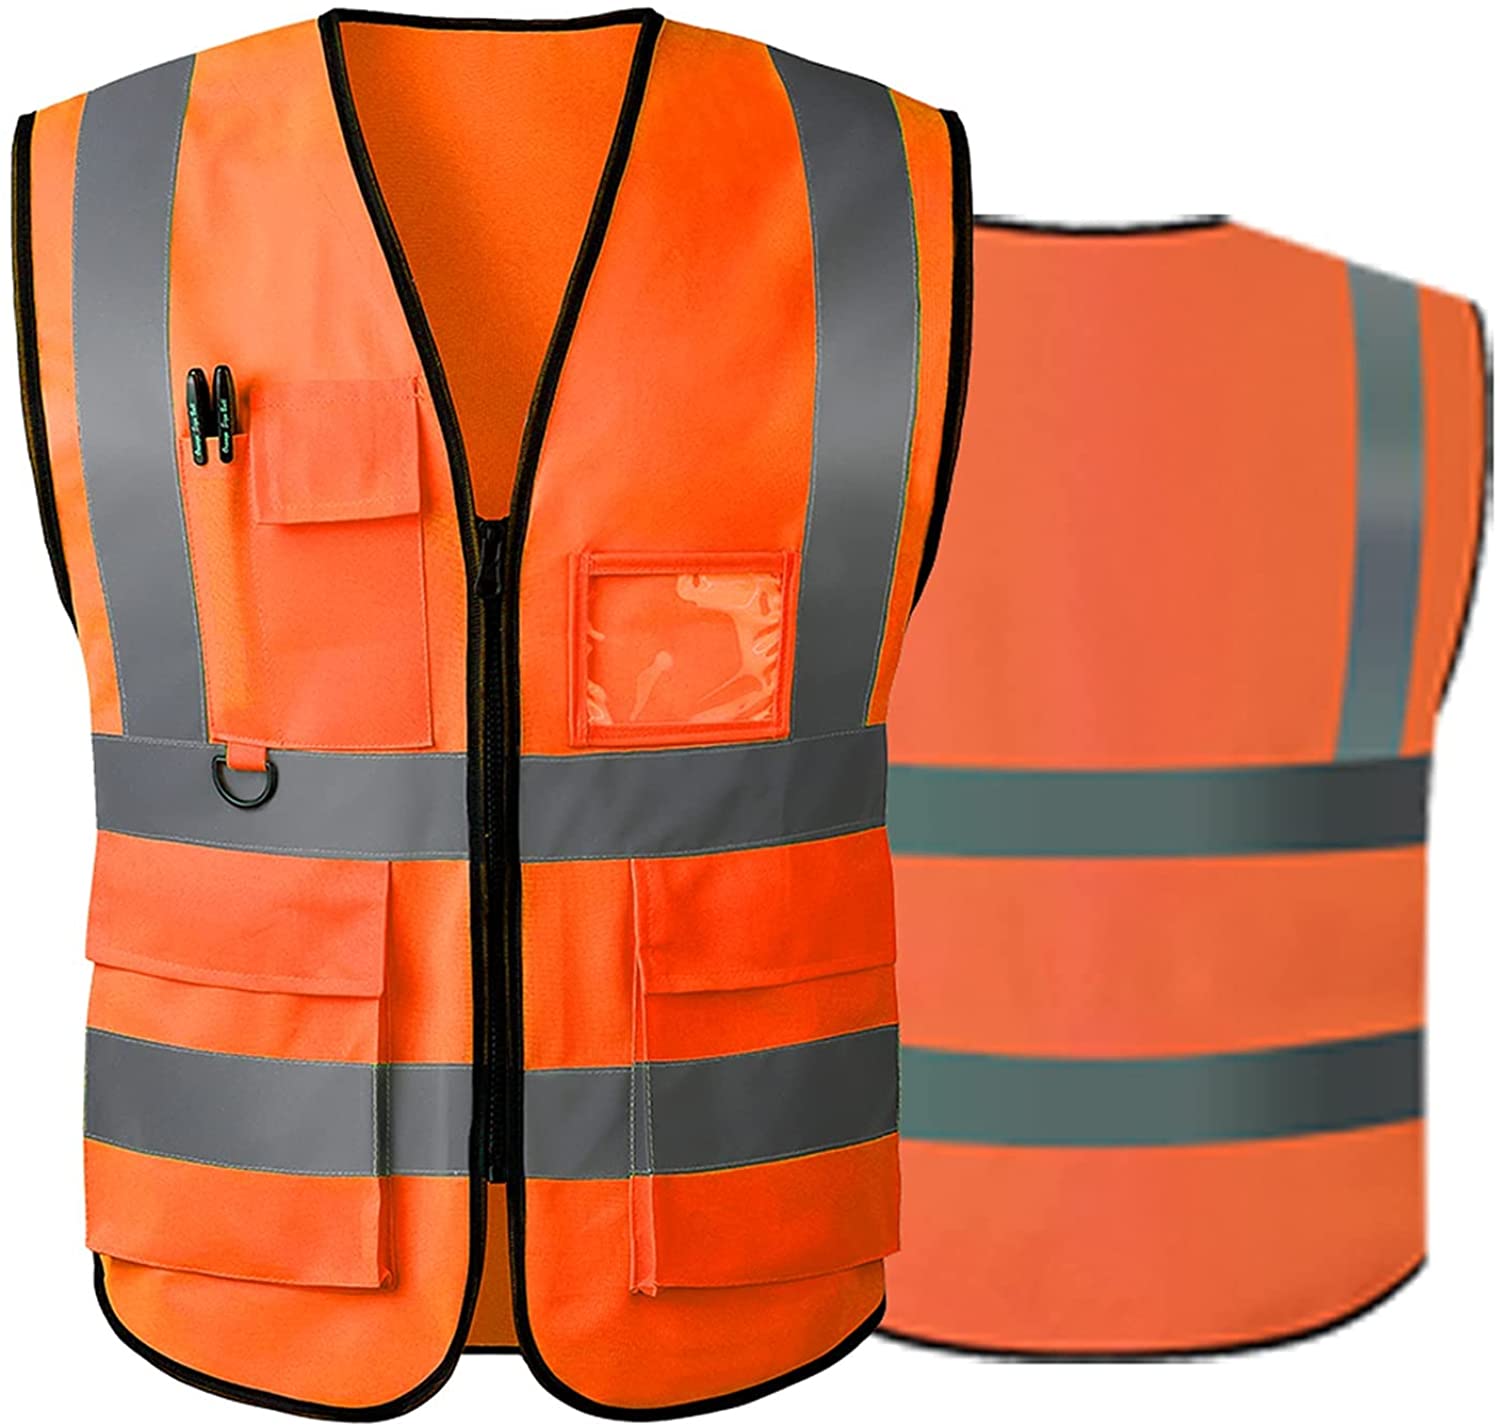 Reflective Safety Vest for Women Men High Visibility Security with Pockets Zipper Front Meets ANSI/ISEA Standards